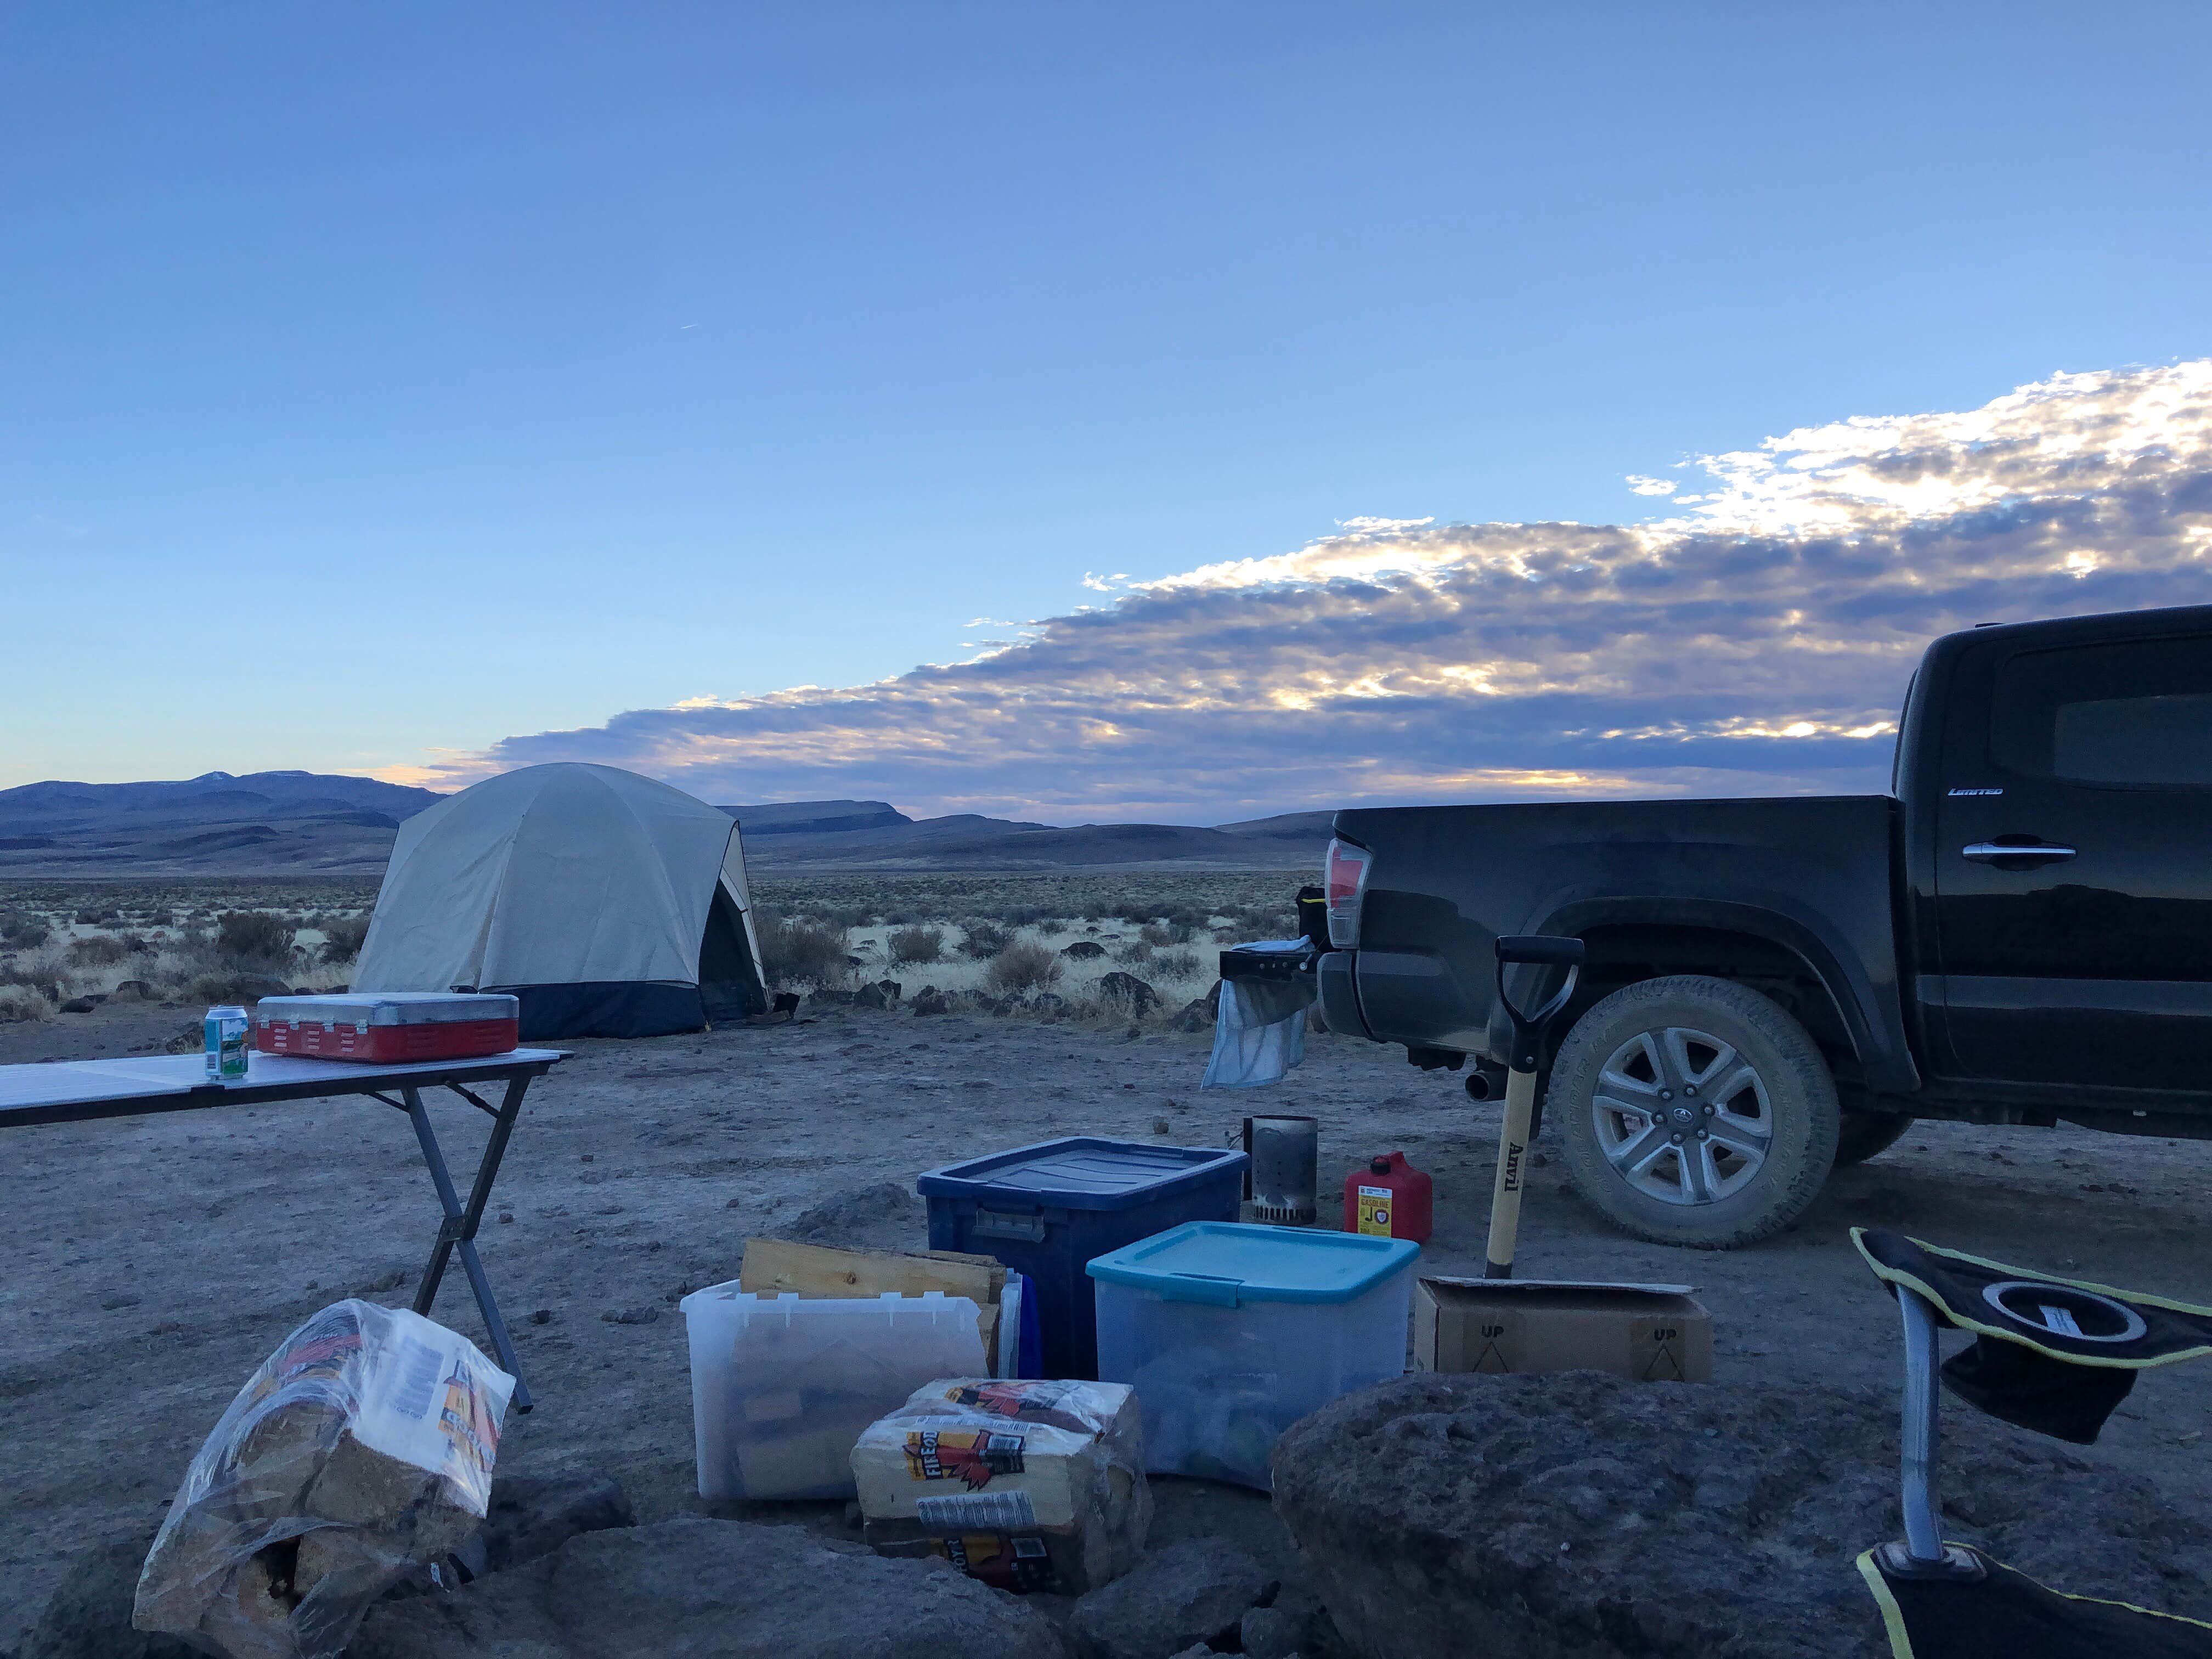 Camper submitted image from Soldier Meadows Dispersed Camping - 4